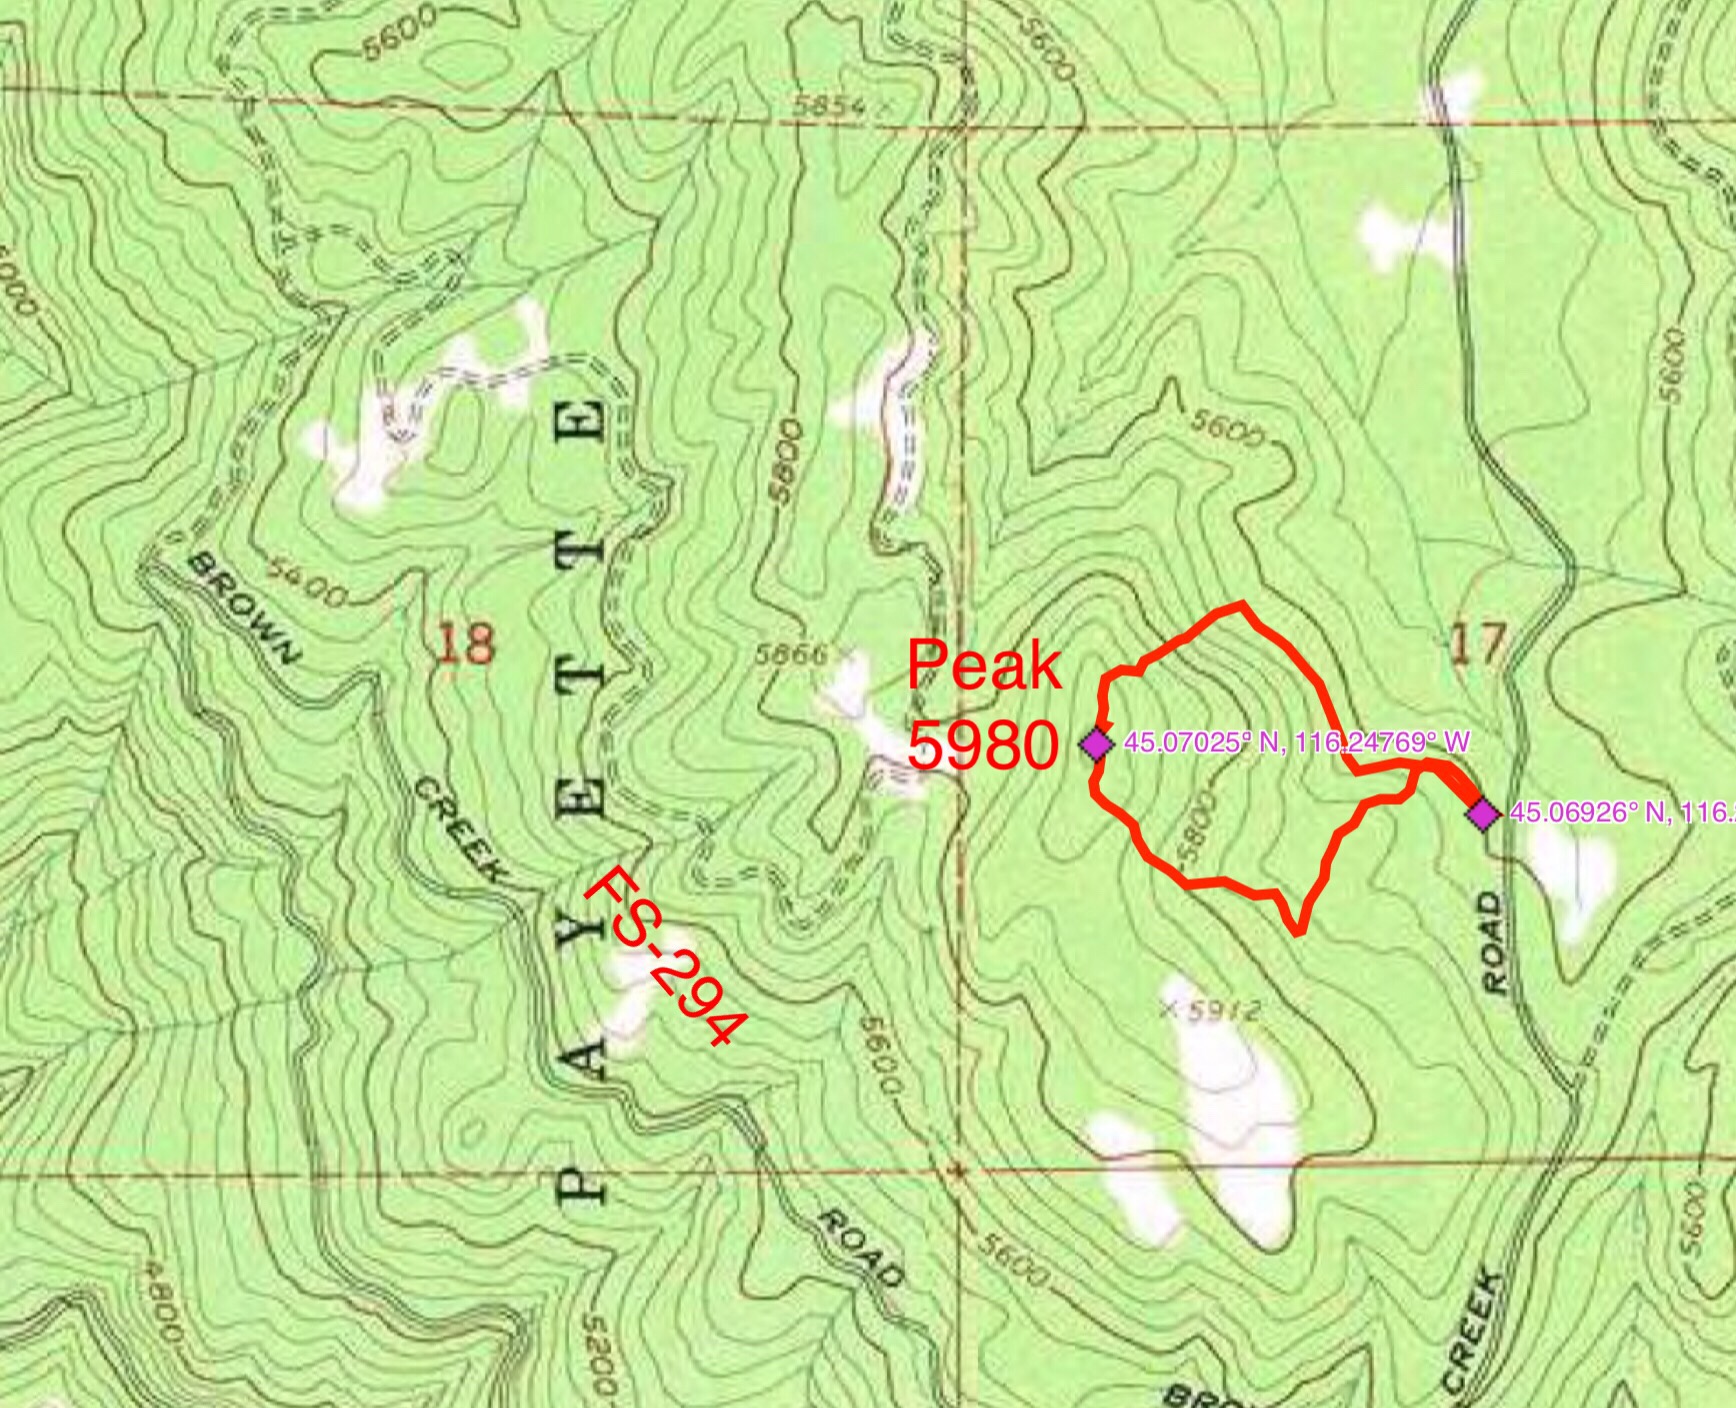 John Platt’s GPS track. His loop route covered 1.2 miles and gained 3222 feet.